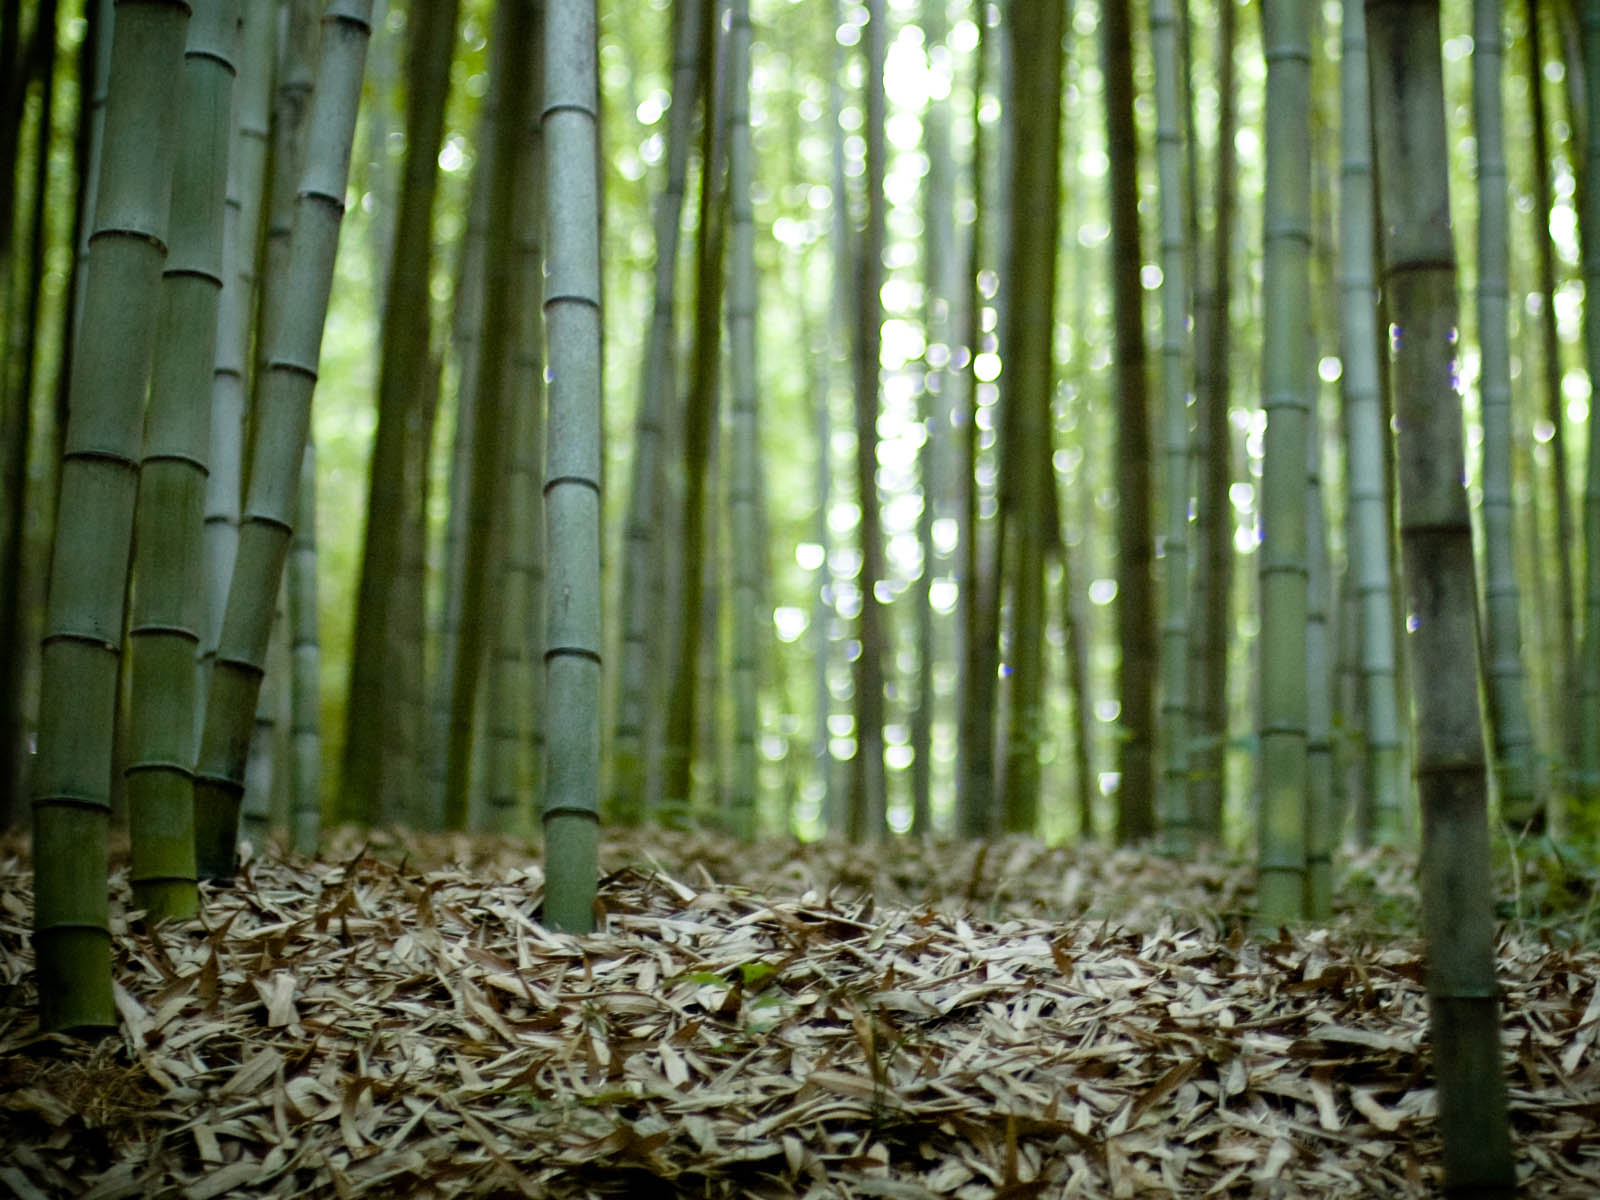 shooting bamboo trees from ground photos hd free downlaod